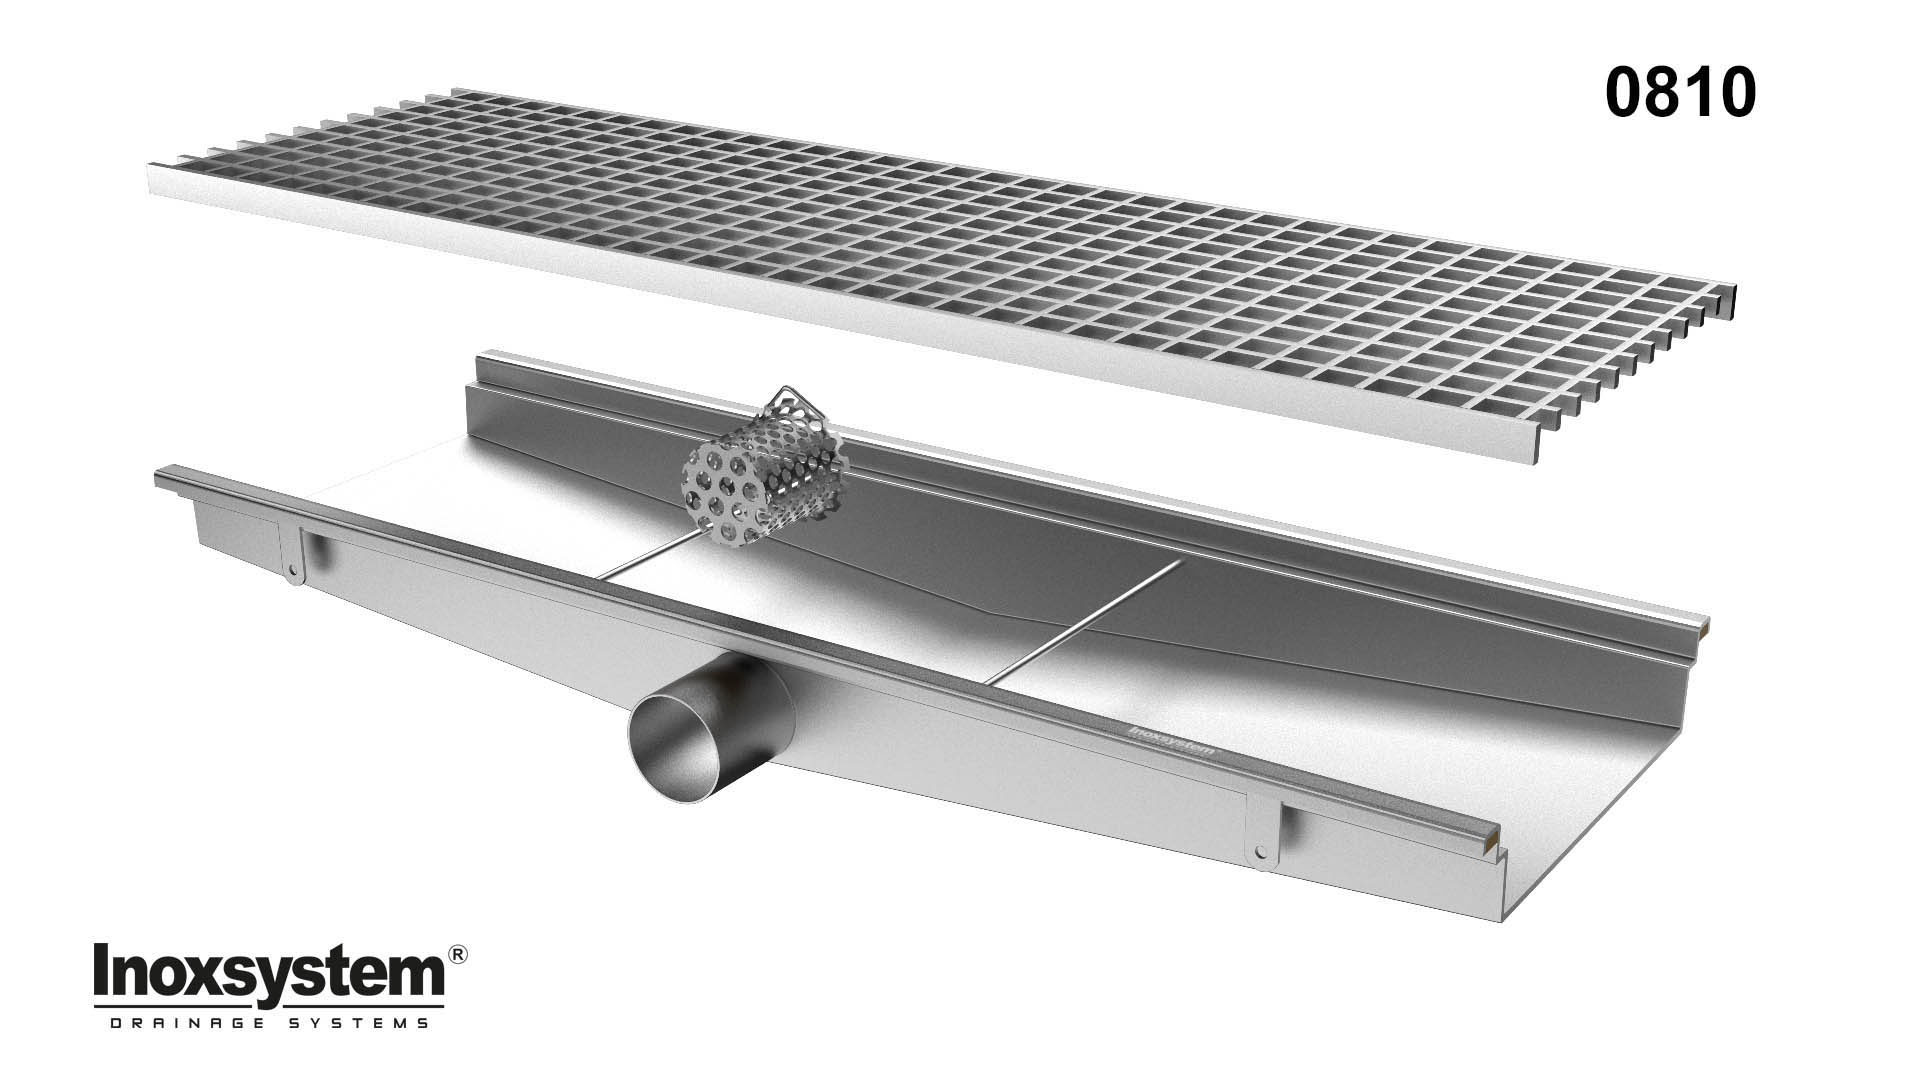 Stainless steel grating channel with siphoned outlet and grating